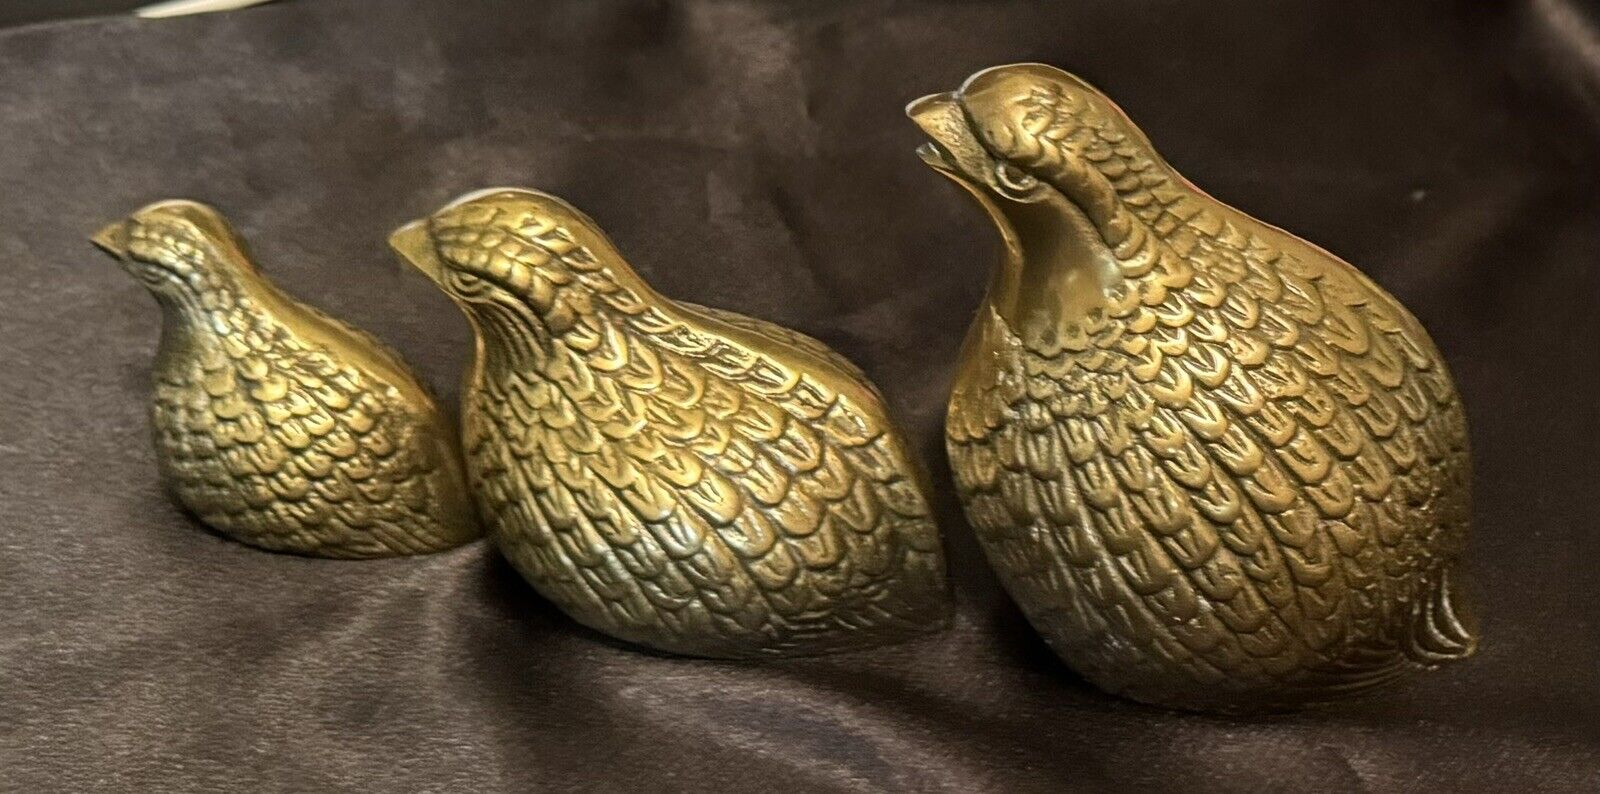 3 Solid Brass Leonard Silver Mfg. Co Quail Partridge Paperweights Made In Korea